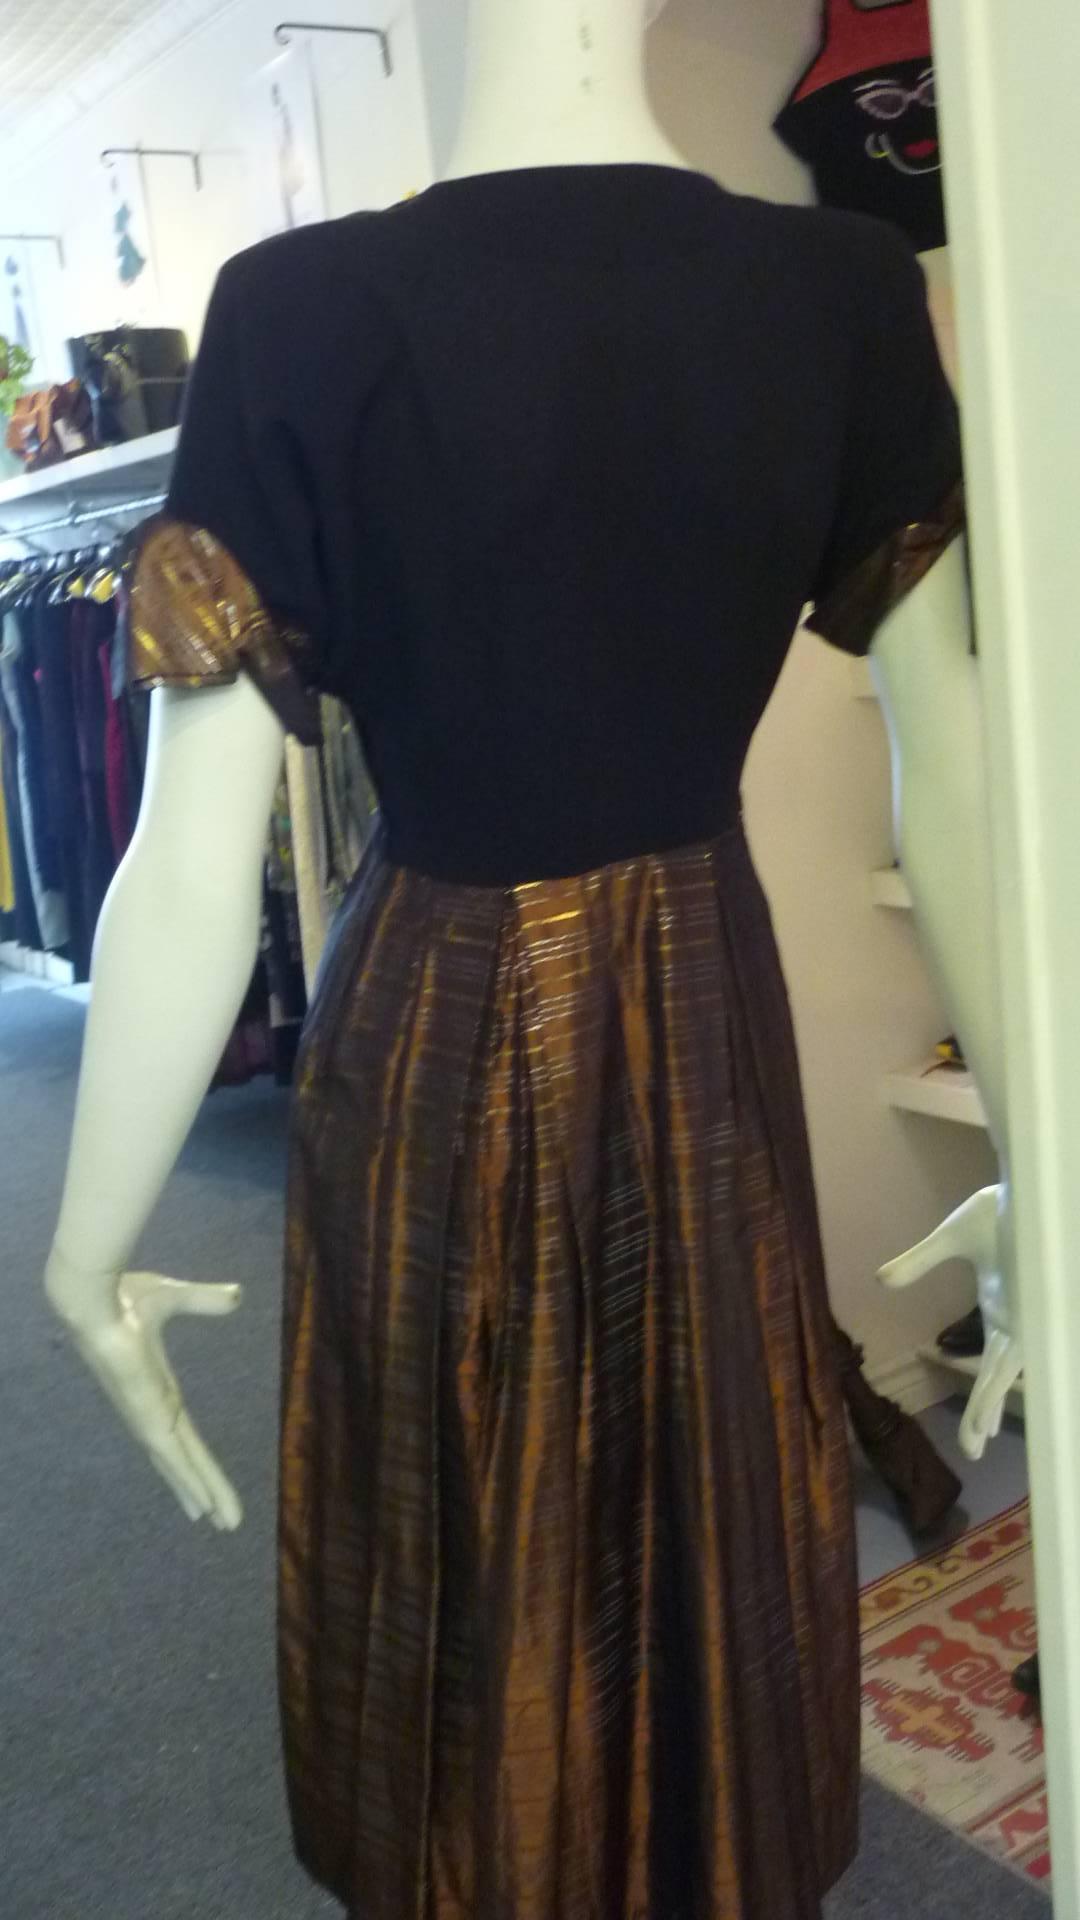 Black crepe top and bronze and gold metallic rayon or acetate make up this lovely dress. The metallic pattern is also replicated on the short sleeve cuffs with bows and the two button closure at the neck. There is soft shoulder